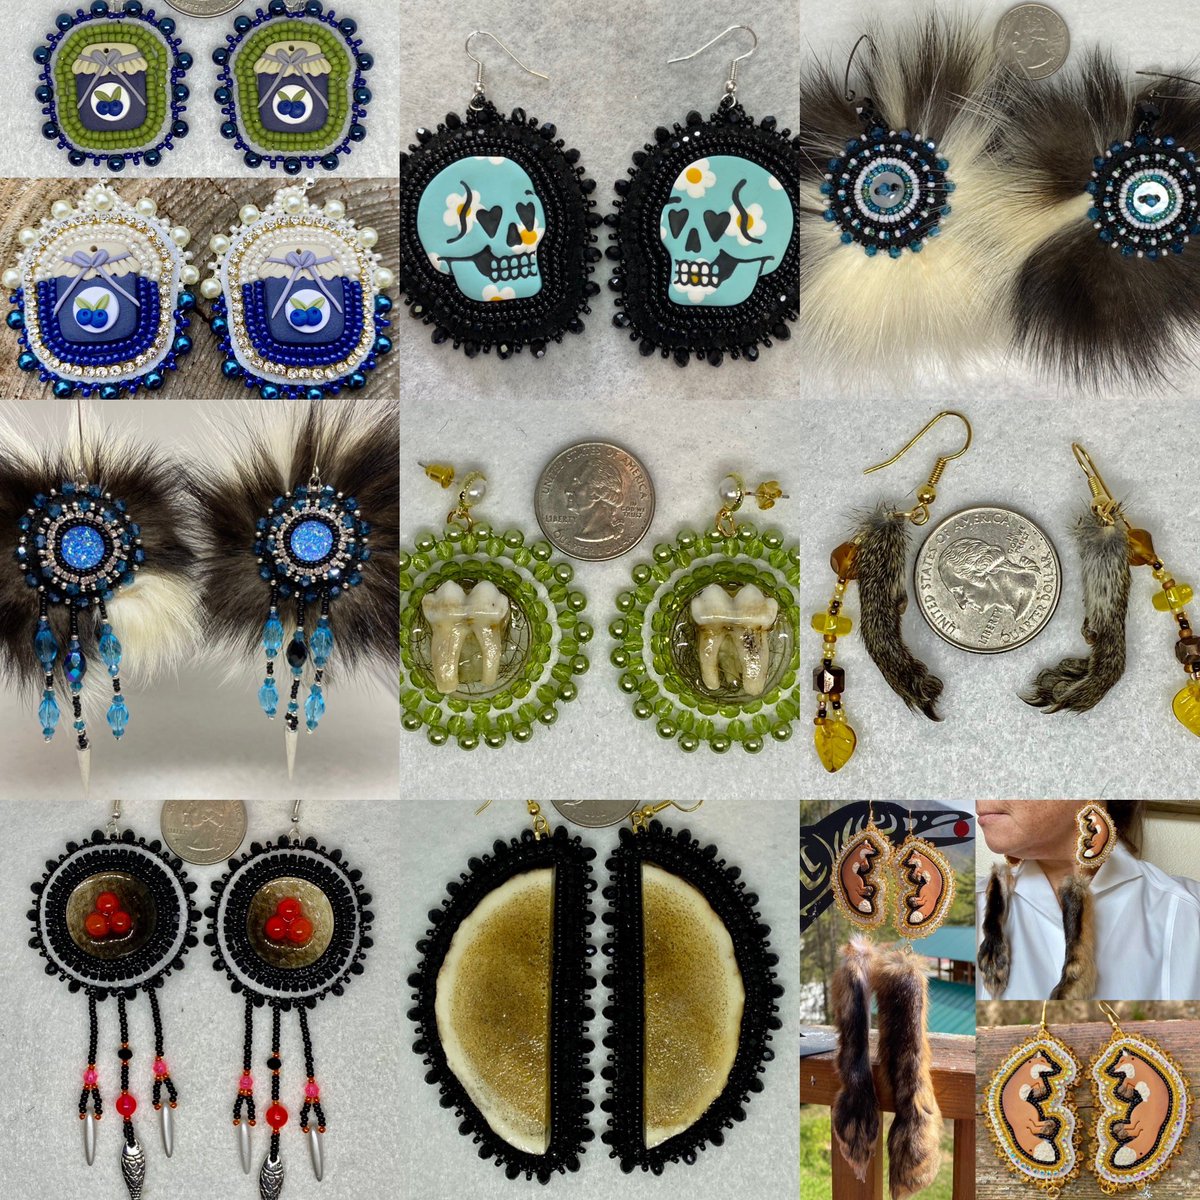 Happy Solstice! Celebrate with earrings! 25% off everything today with code COHO at checkout! Tell Auntie-plz share 😍
@NDNbeadmarket @IndigenousBeads 

look-beadwork.myshopify.com